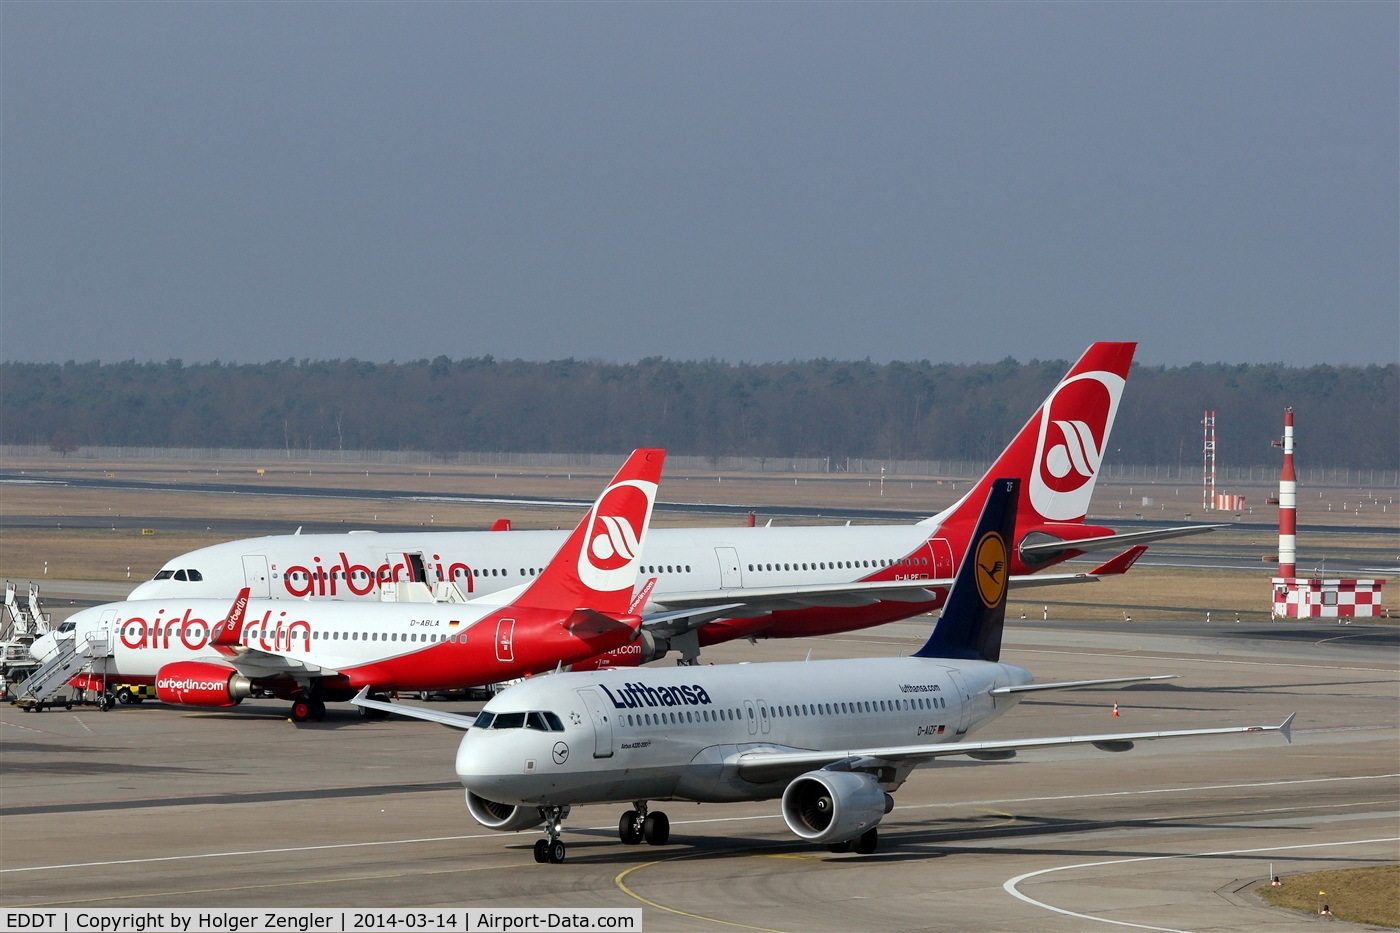 Tegel International Airport (closing in 2011), Berlin Germany (EDDT) - How it looks on TXL aprons and taxiways....